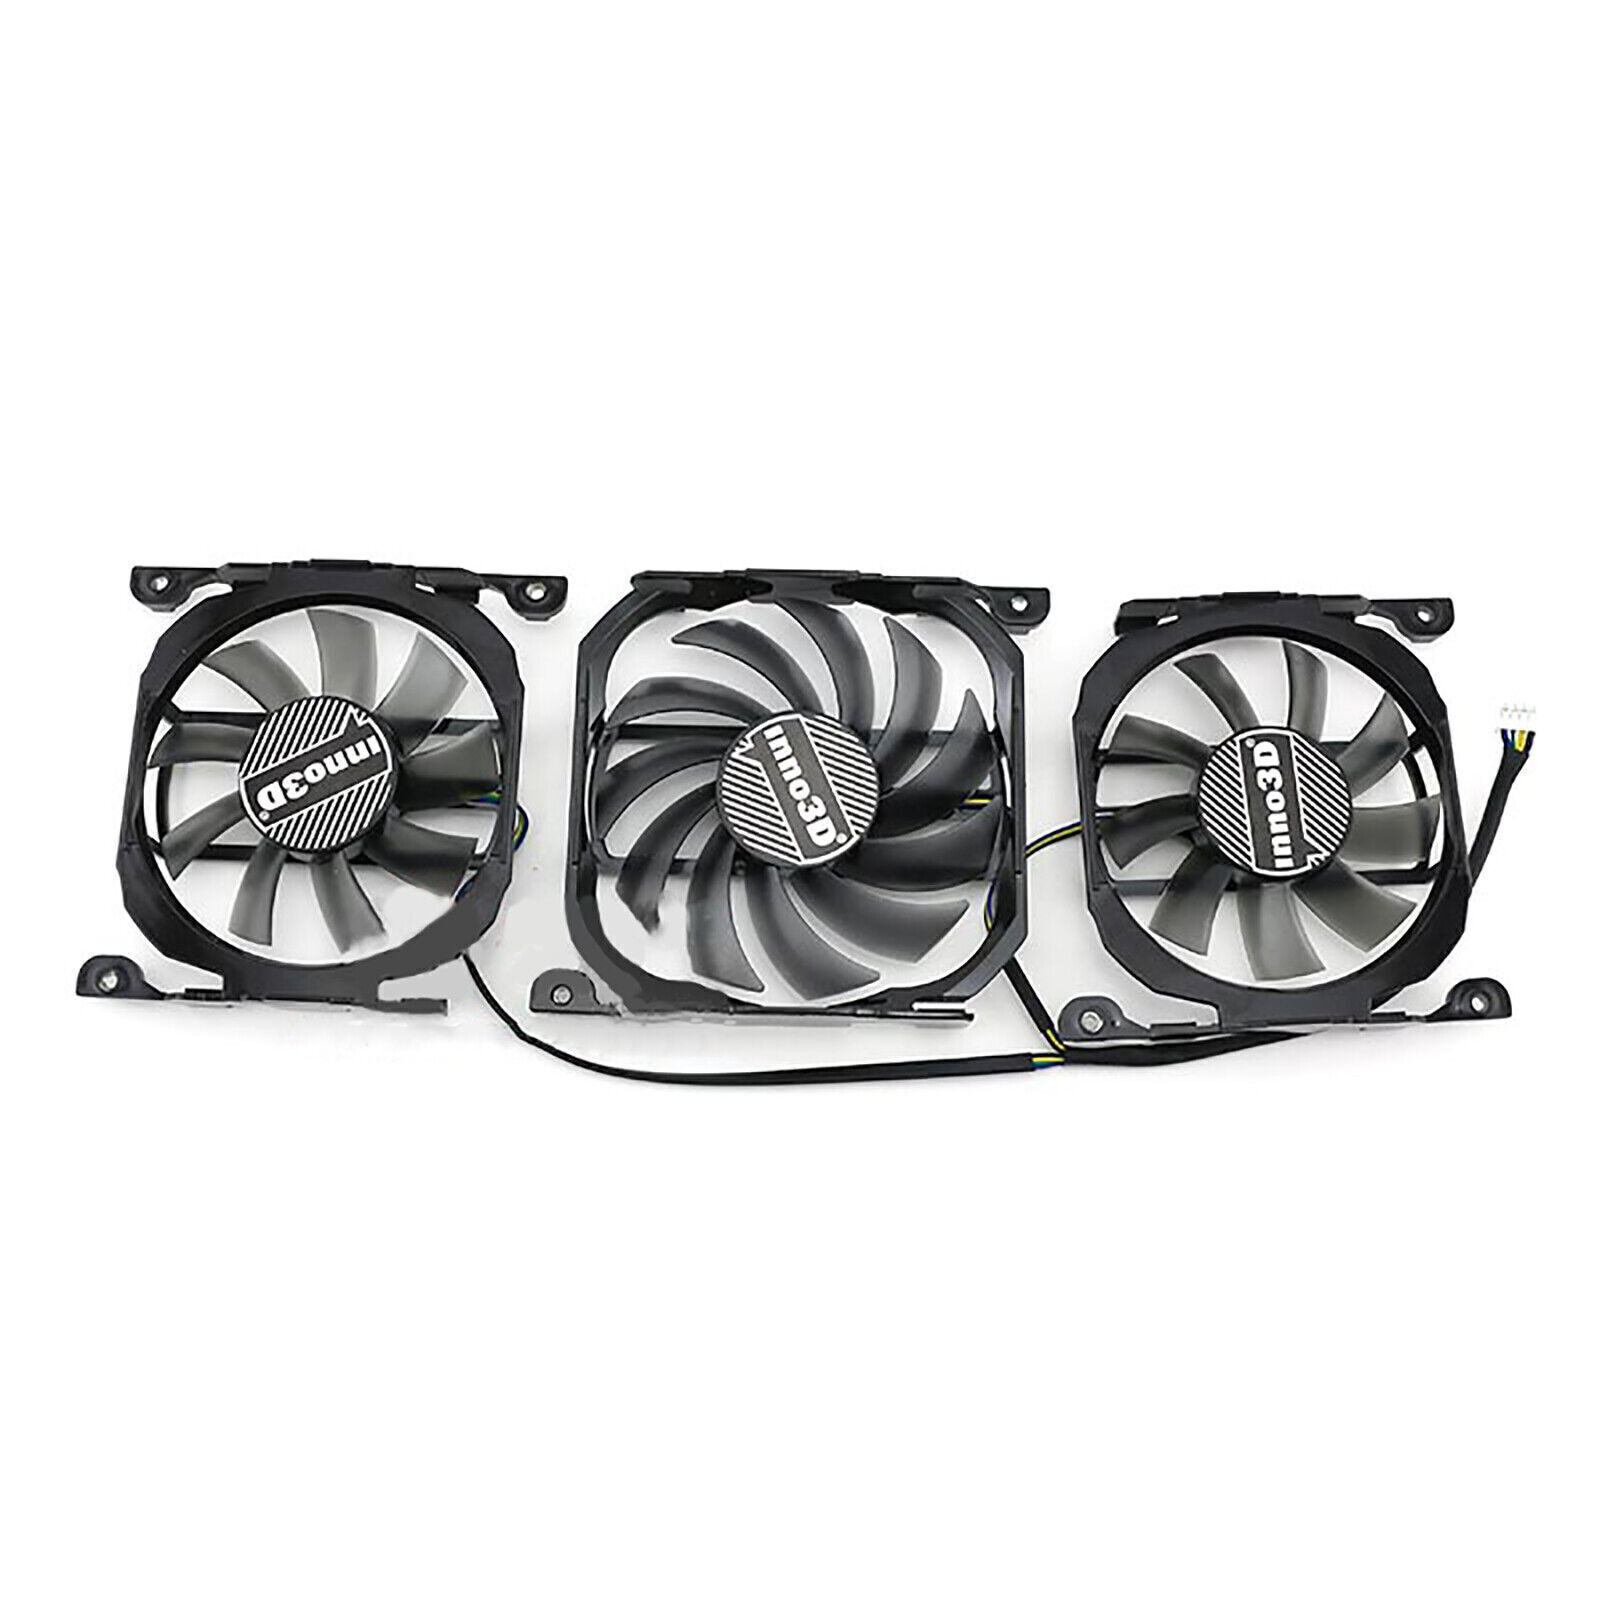 Graphics Card Cooling Fan for Yeston R9 290 R9 280X Game Master Video Card #YS